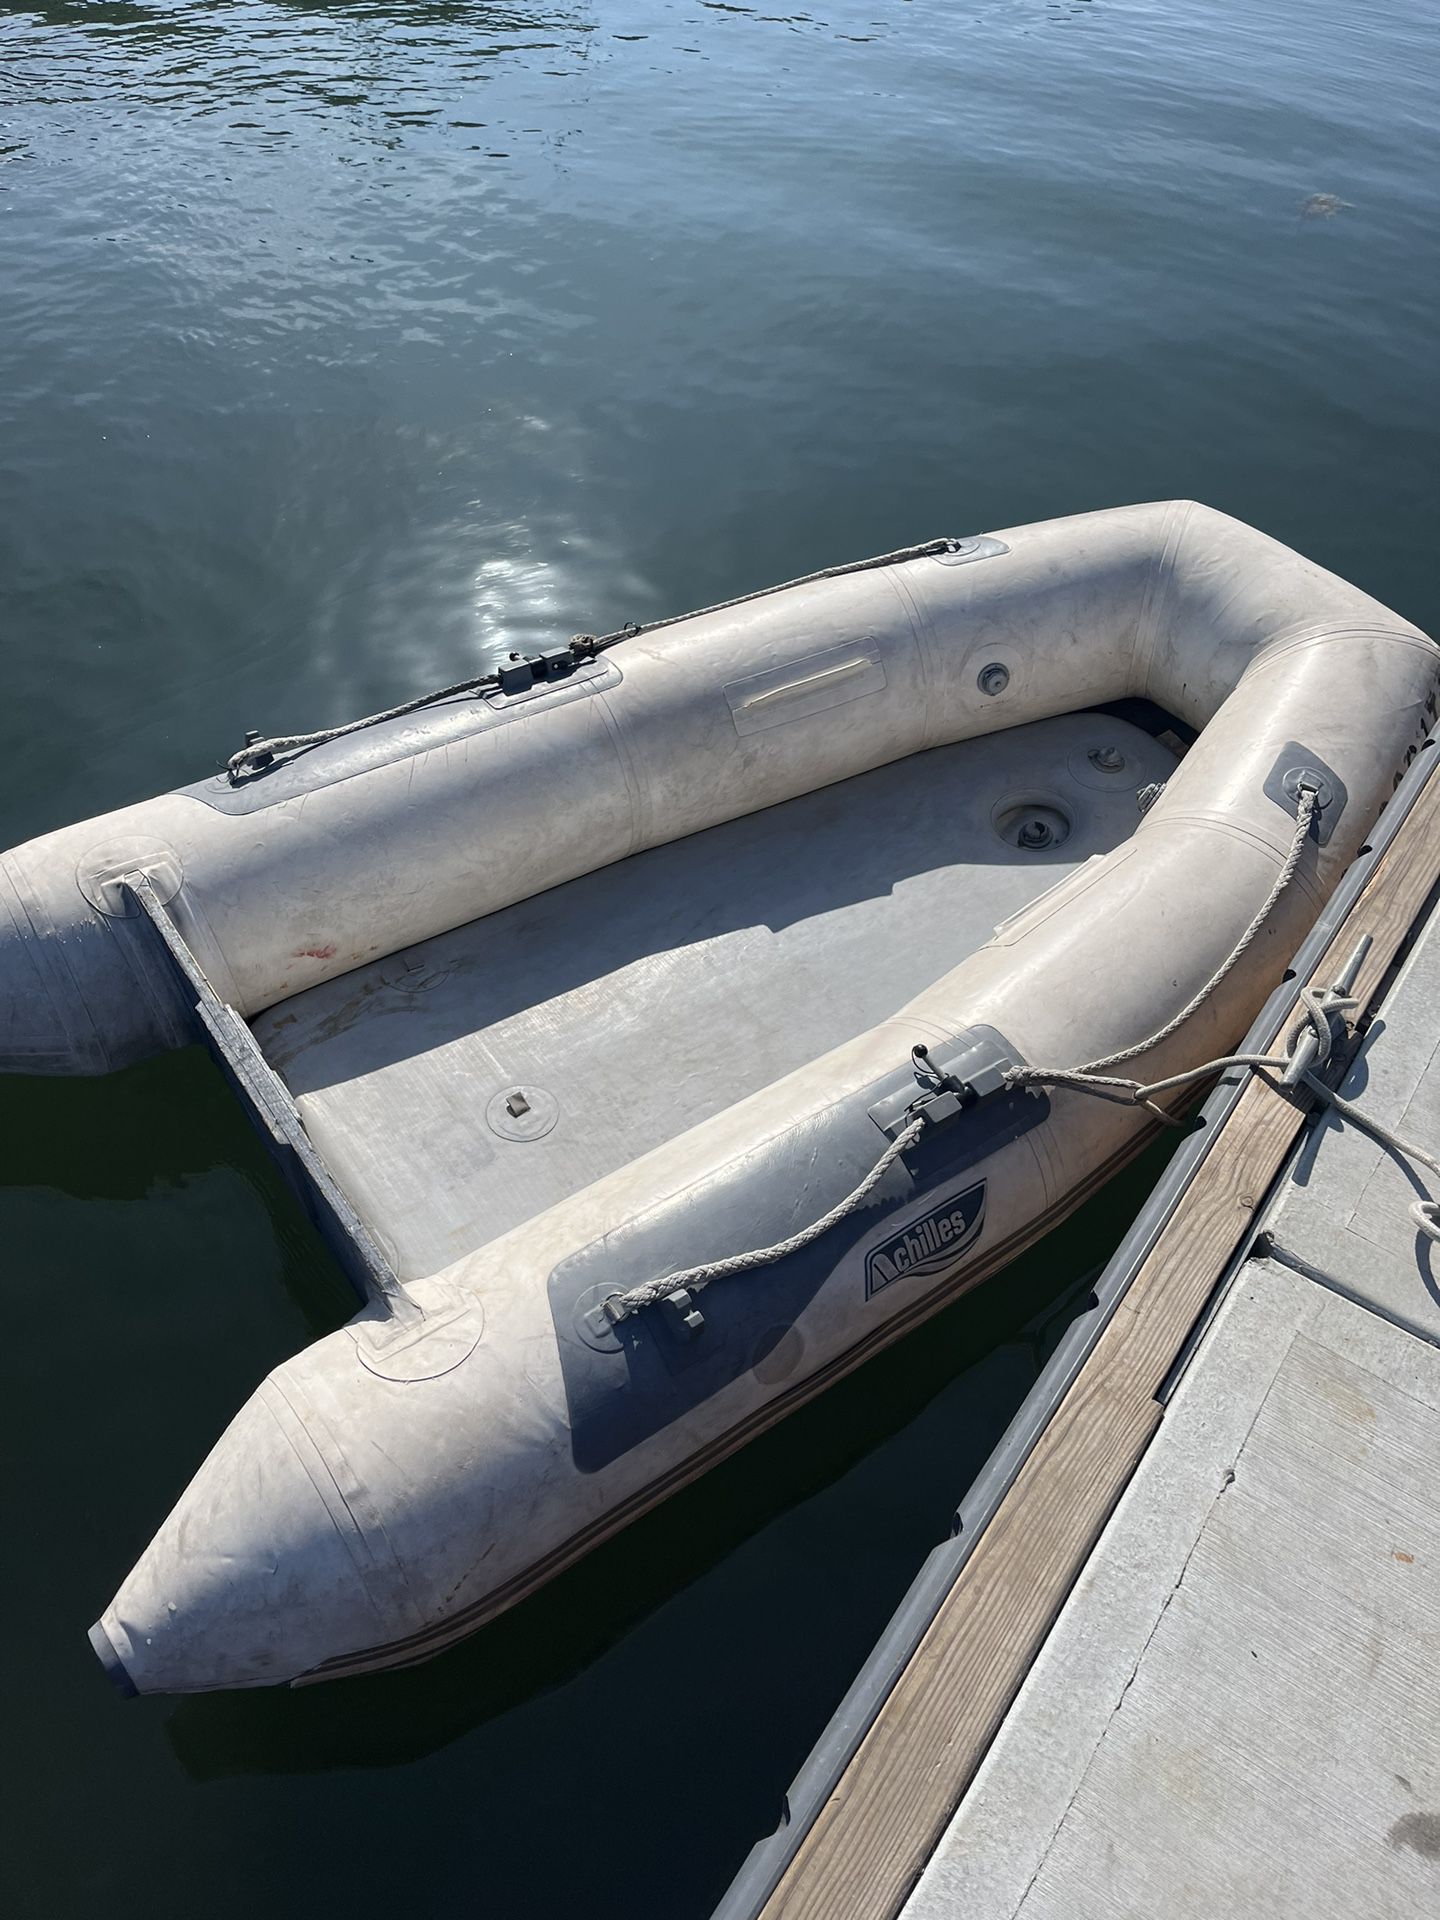 10ft Achilles Dinghy With Motor